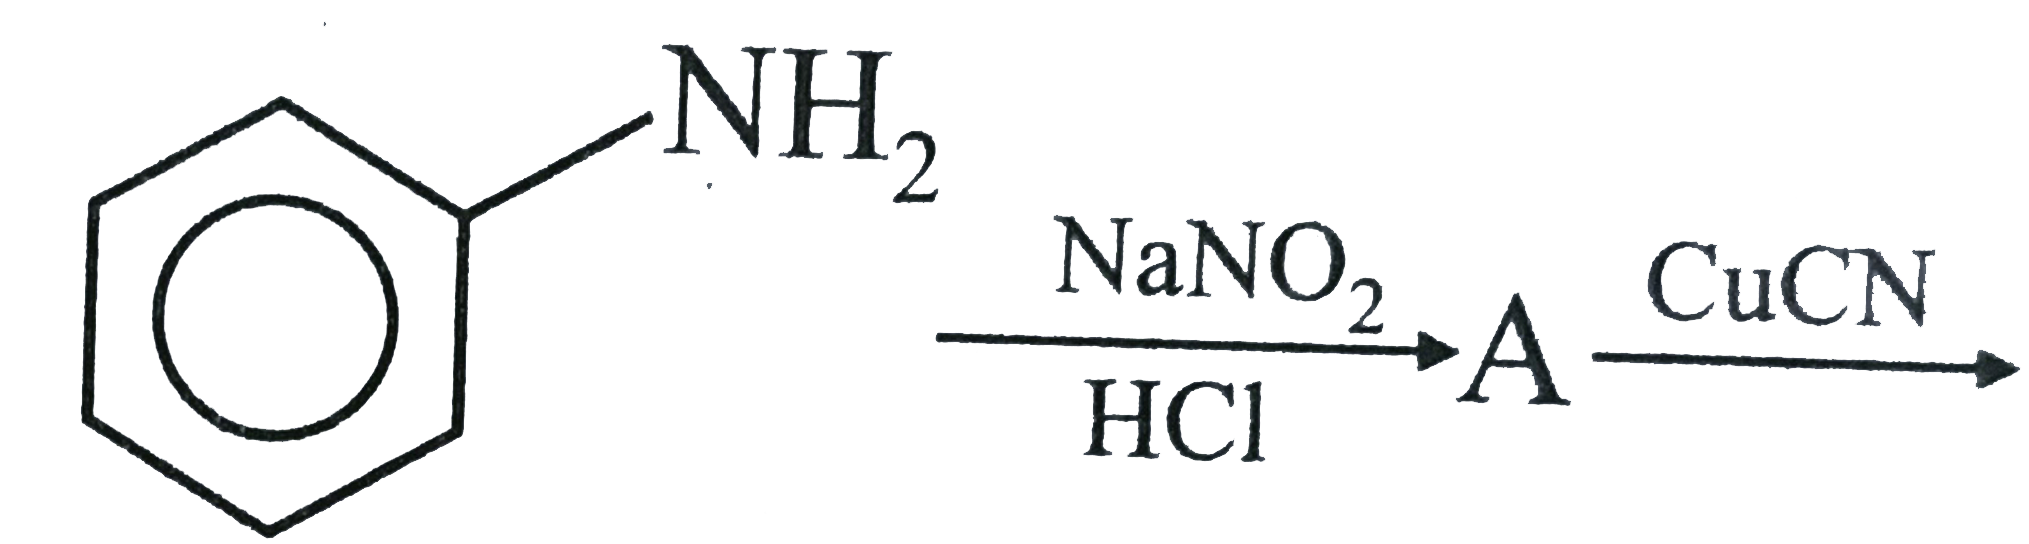 Boverset(H(2))underset(Ni)(rarr)Coverset(HNO(2))(rarr)D    Aniline in a set of reactions yielded a product D.   The structure of product D would.